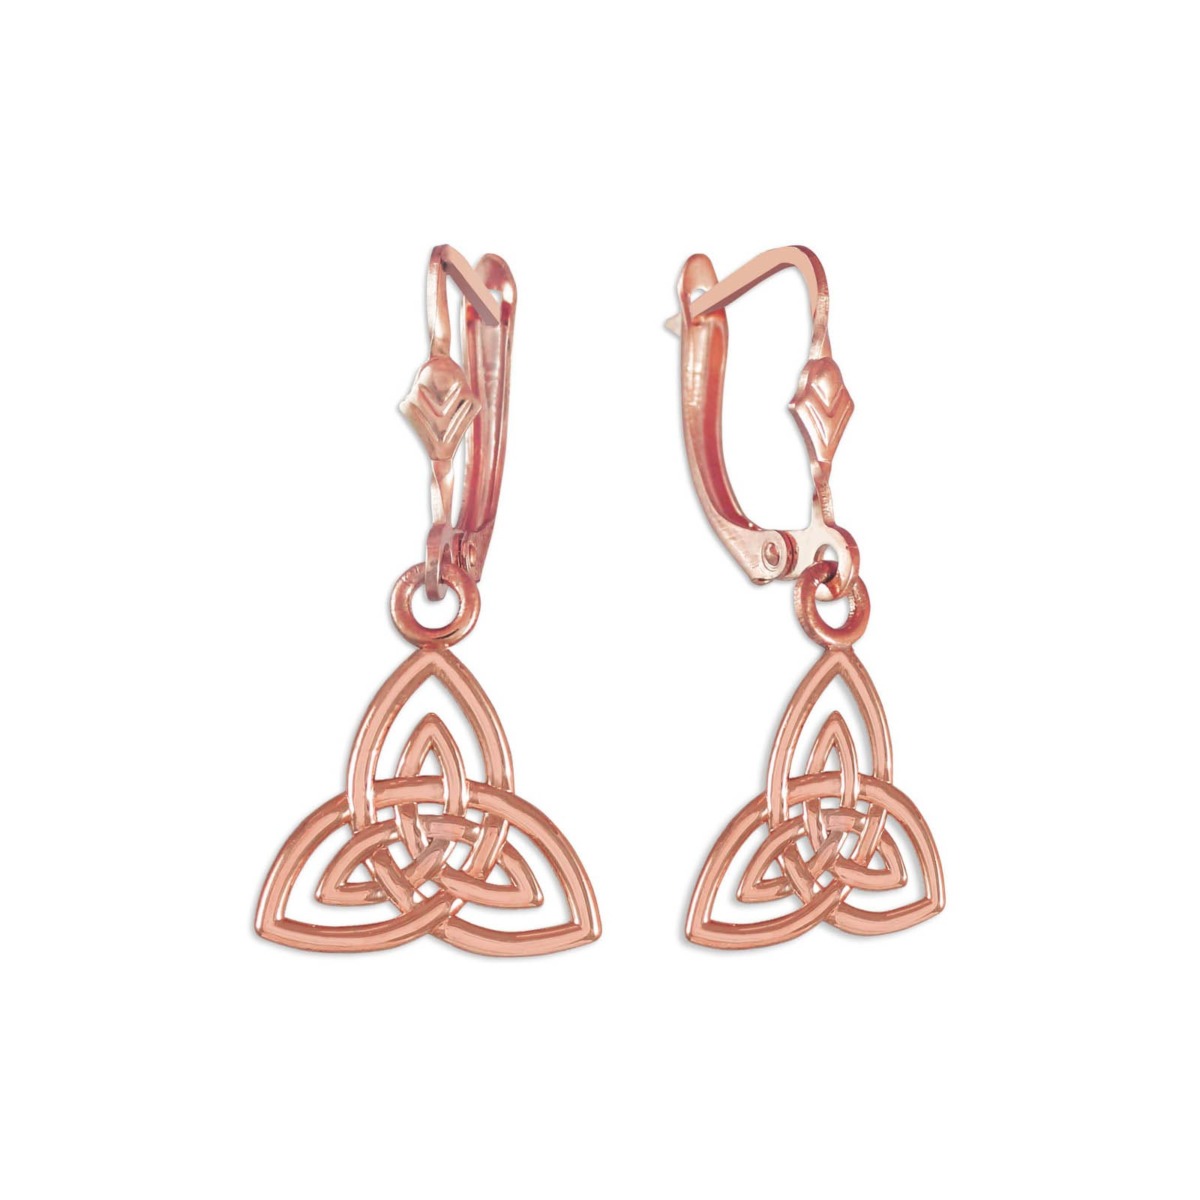 Gent Earrings in Rose Gold Boutique GOOFASH